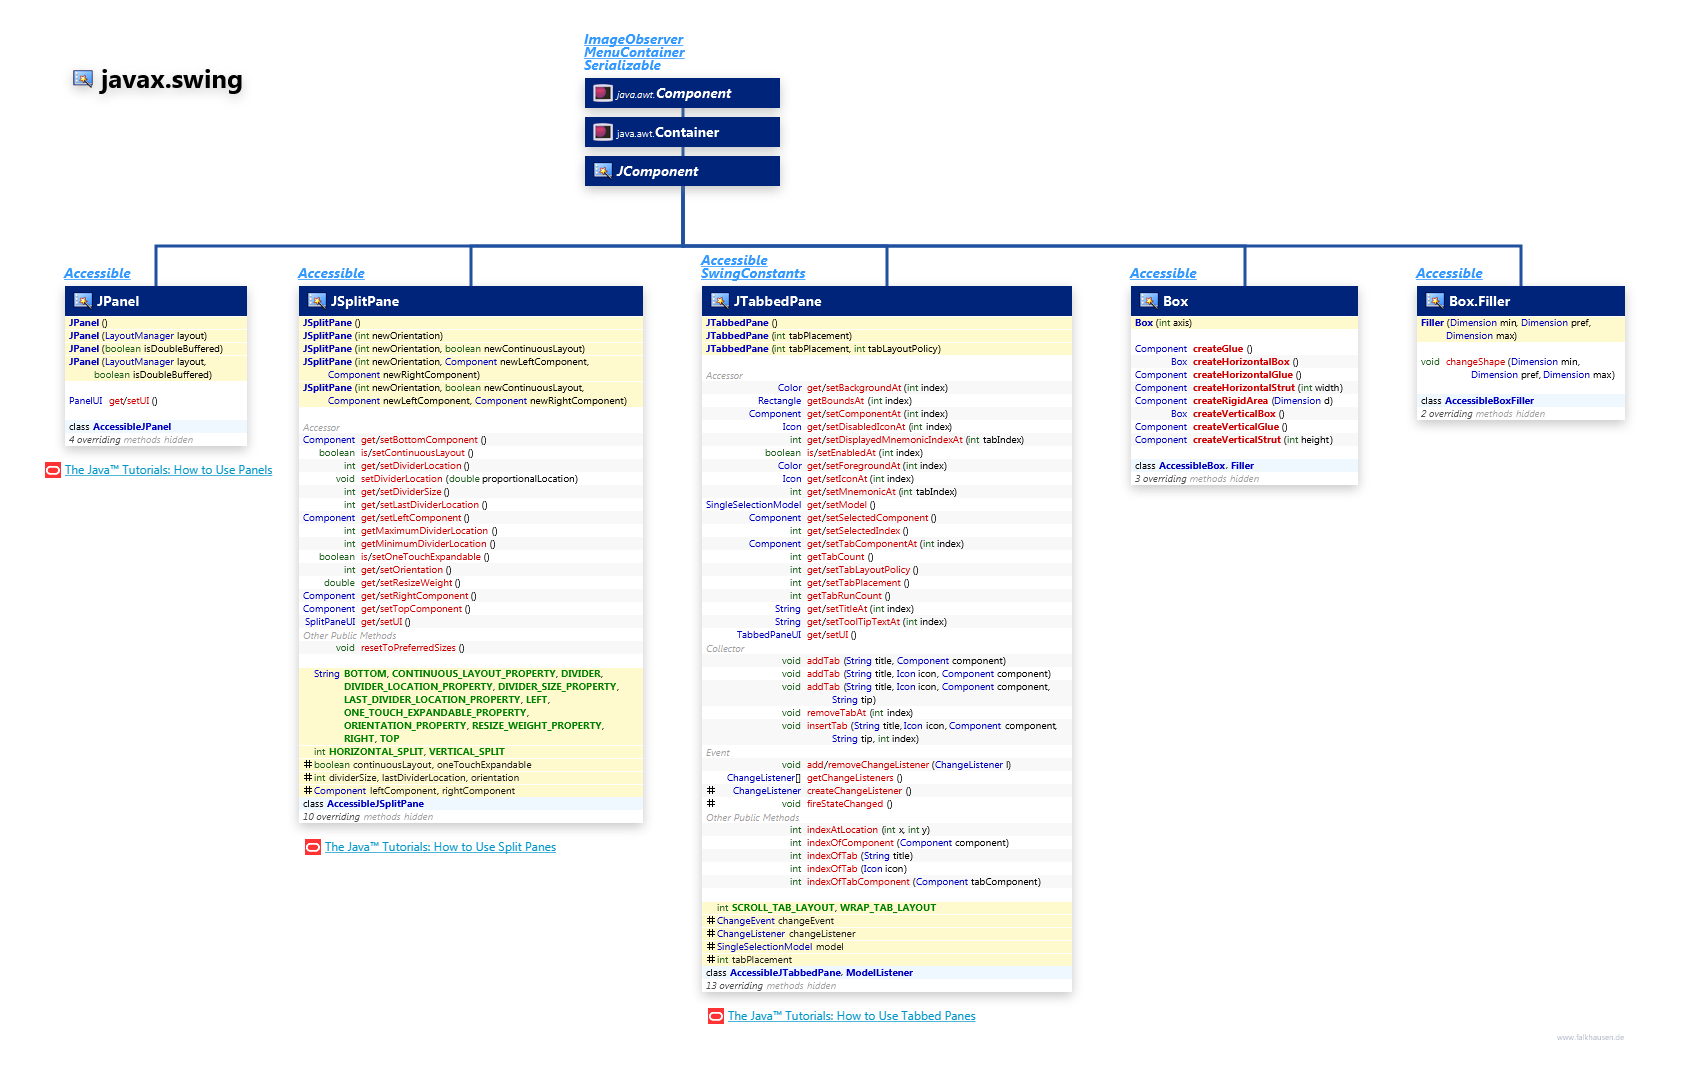 javax.swing Panes class diagram and api documentation for Java 8